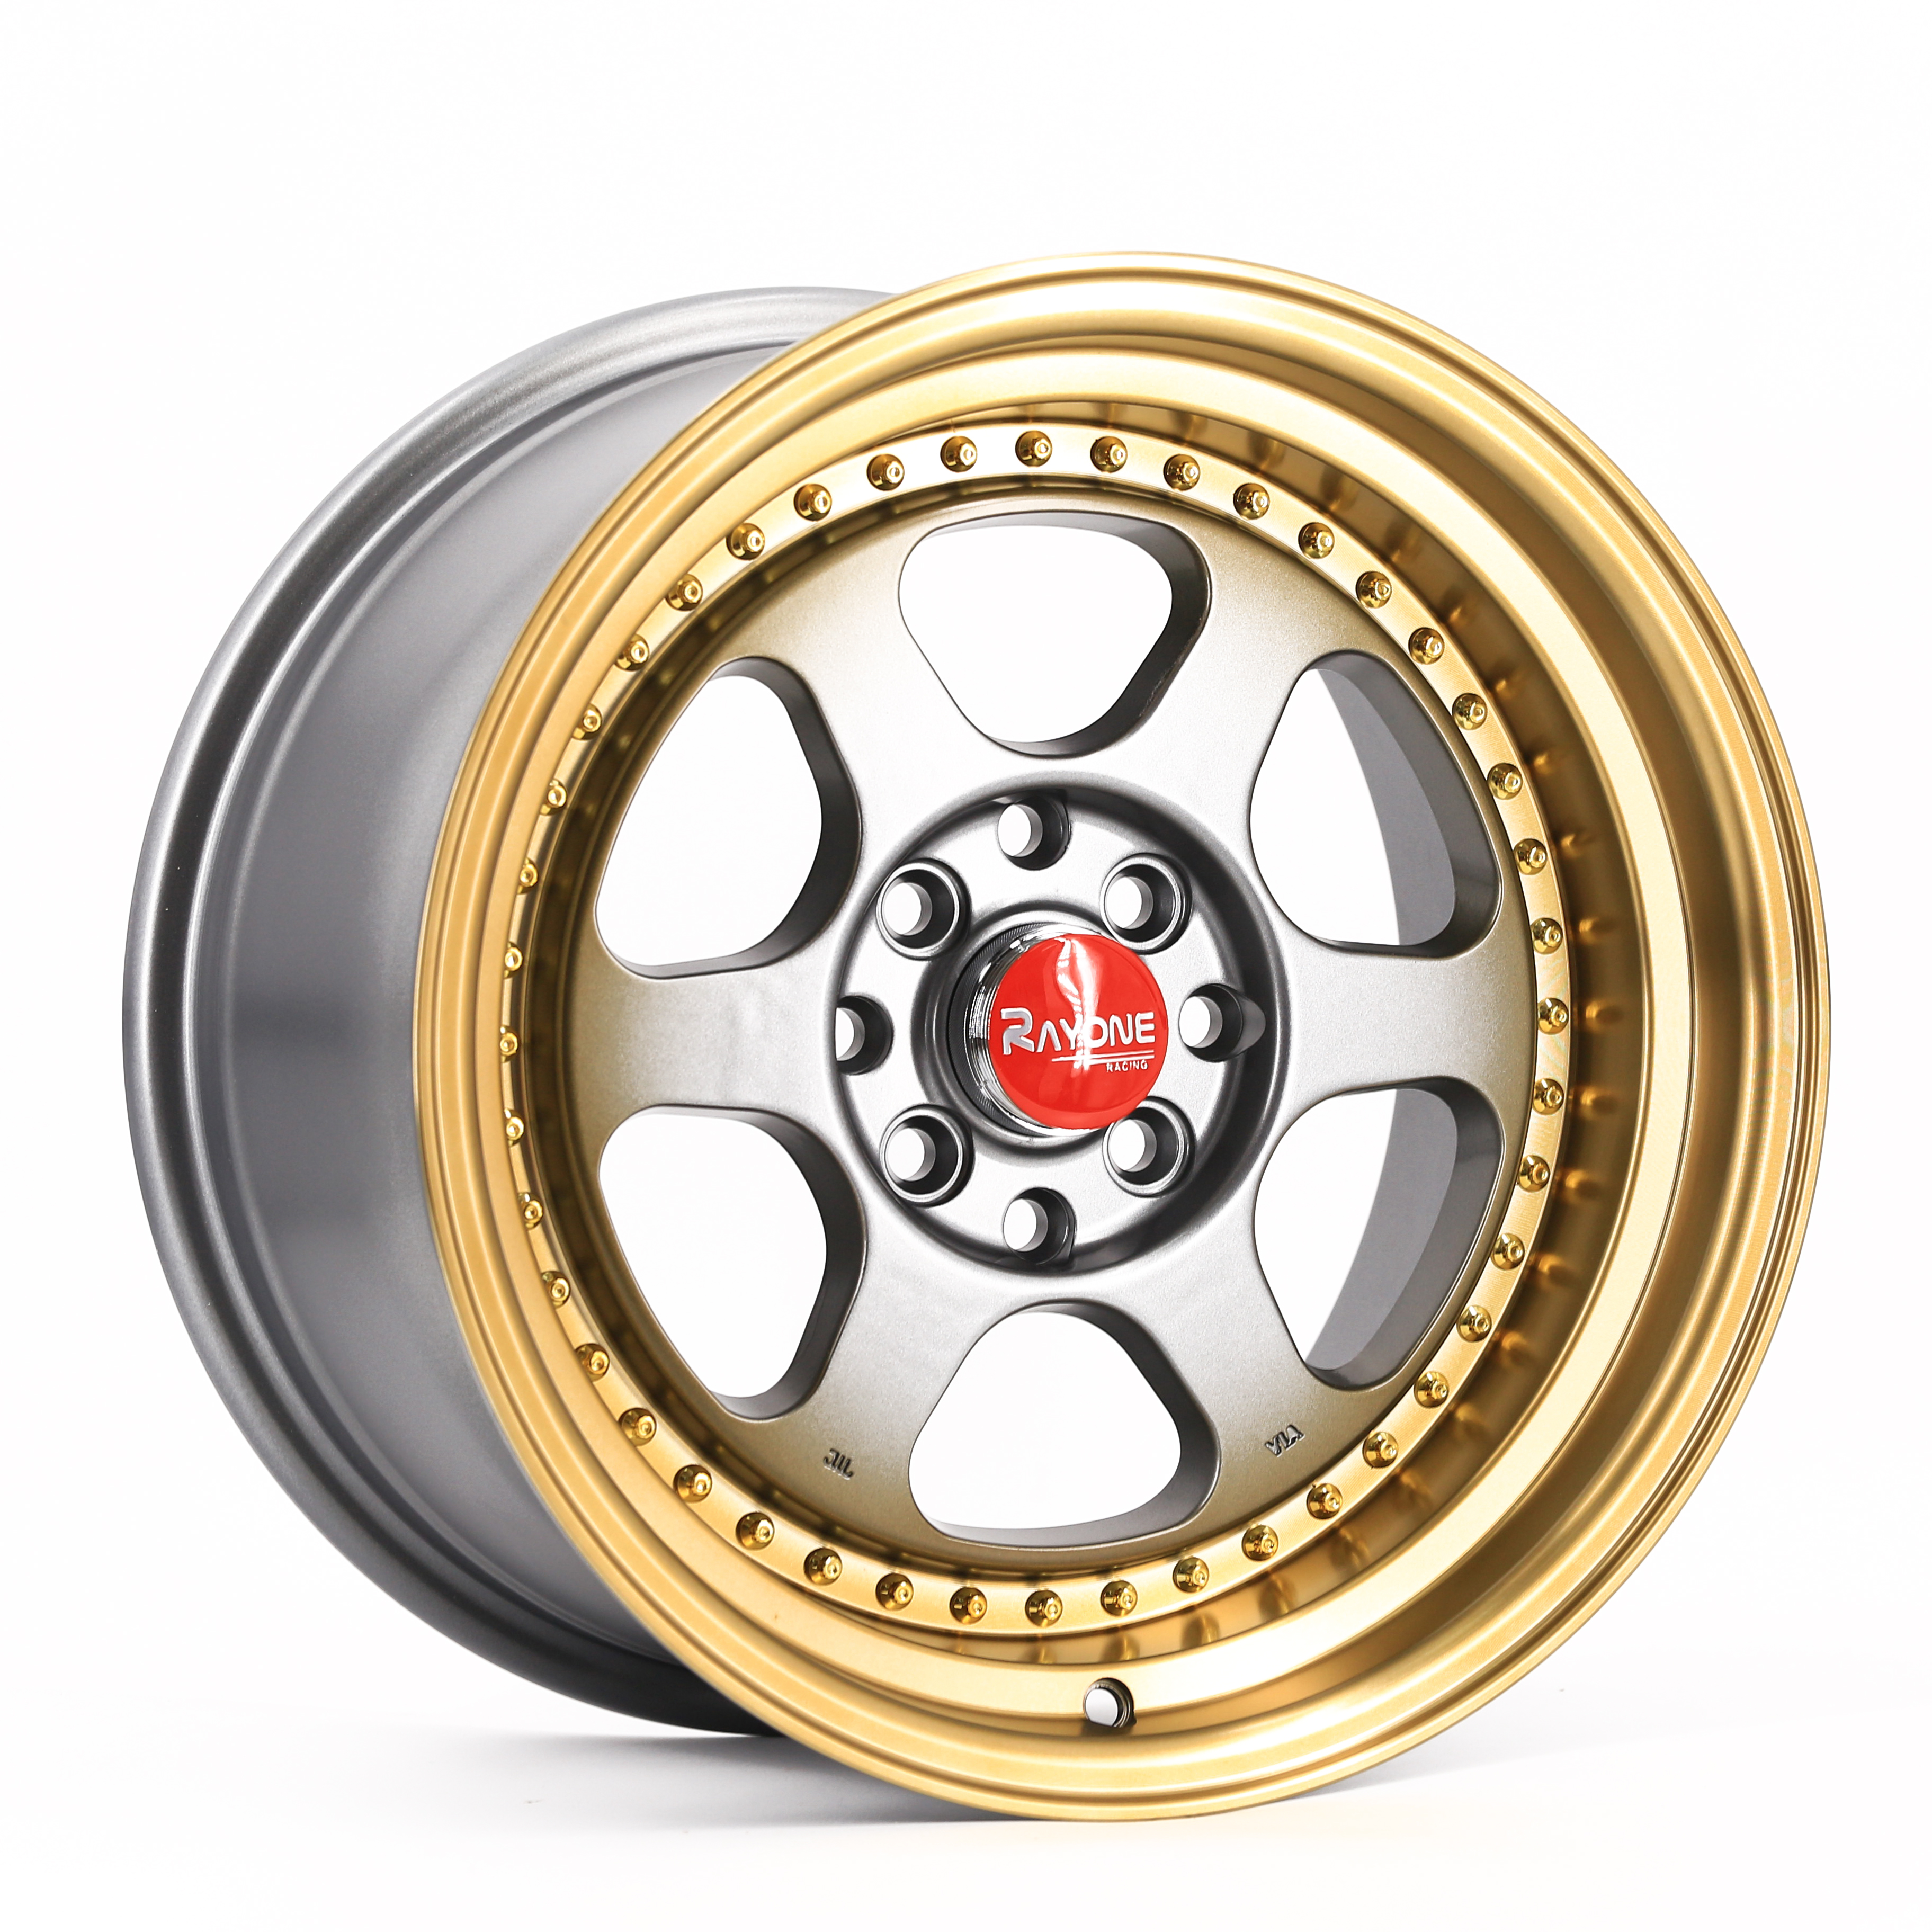 OEM/ODM Supplier 20 Inch Mag Wheels - Gold Color Deep Dish Rivets 4 Hole Rims 15 Inch Alloy Wheels For Racing Car – Rayone